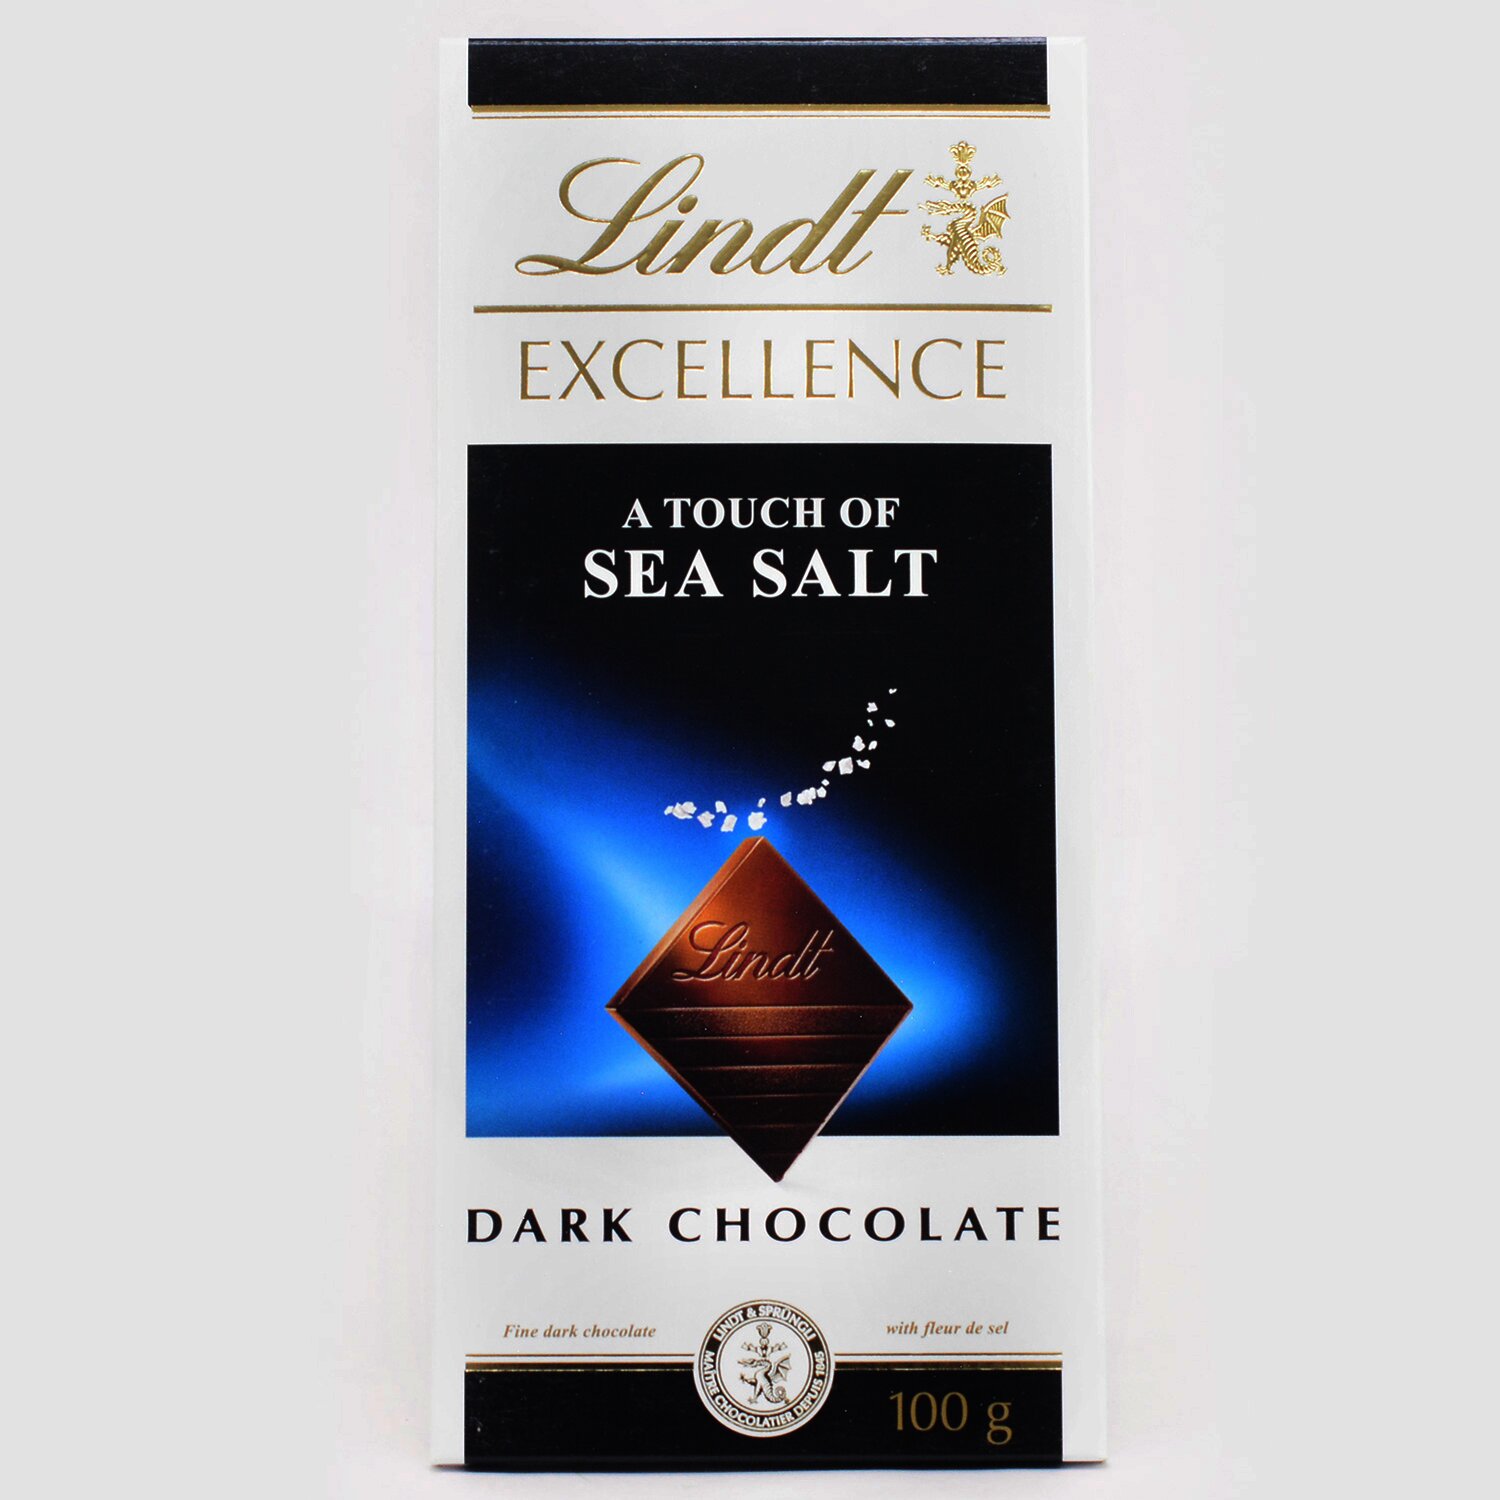 Lindt Excellence A toch of Sea Salt Dark Chocolate